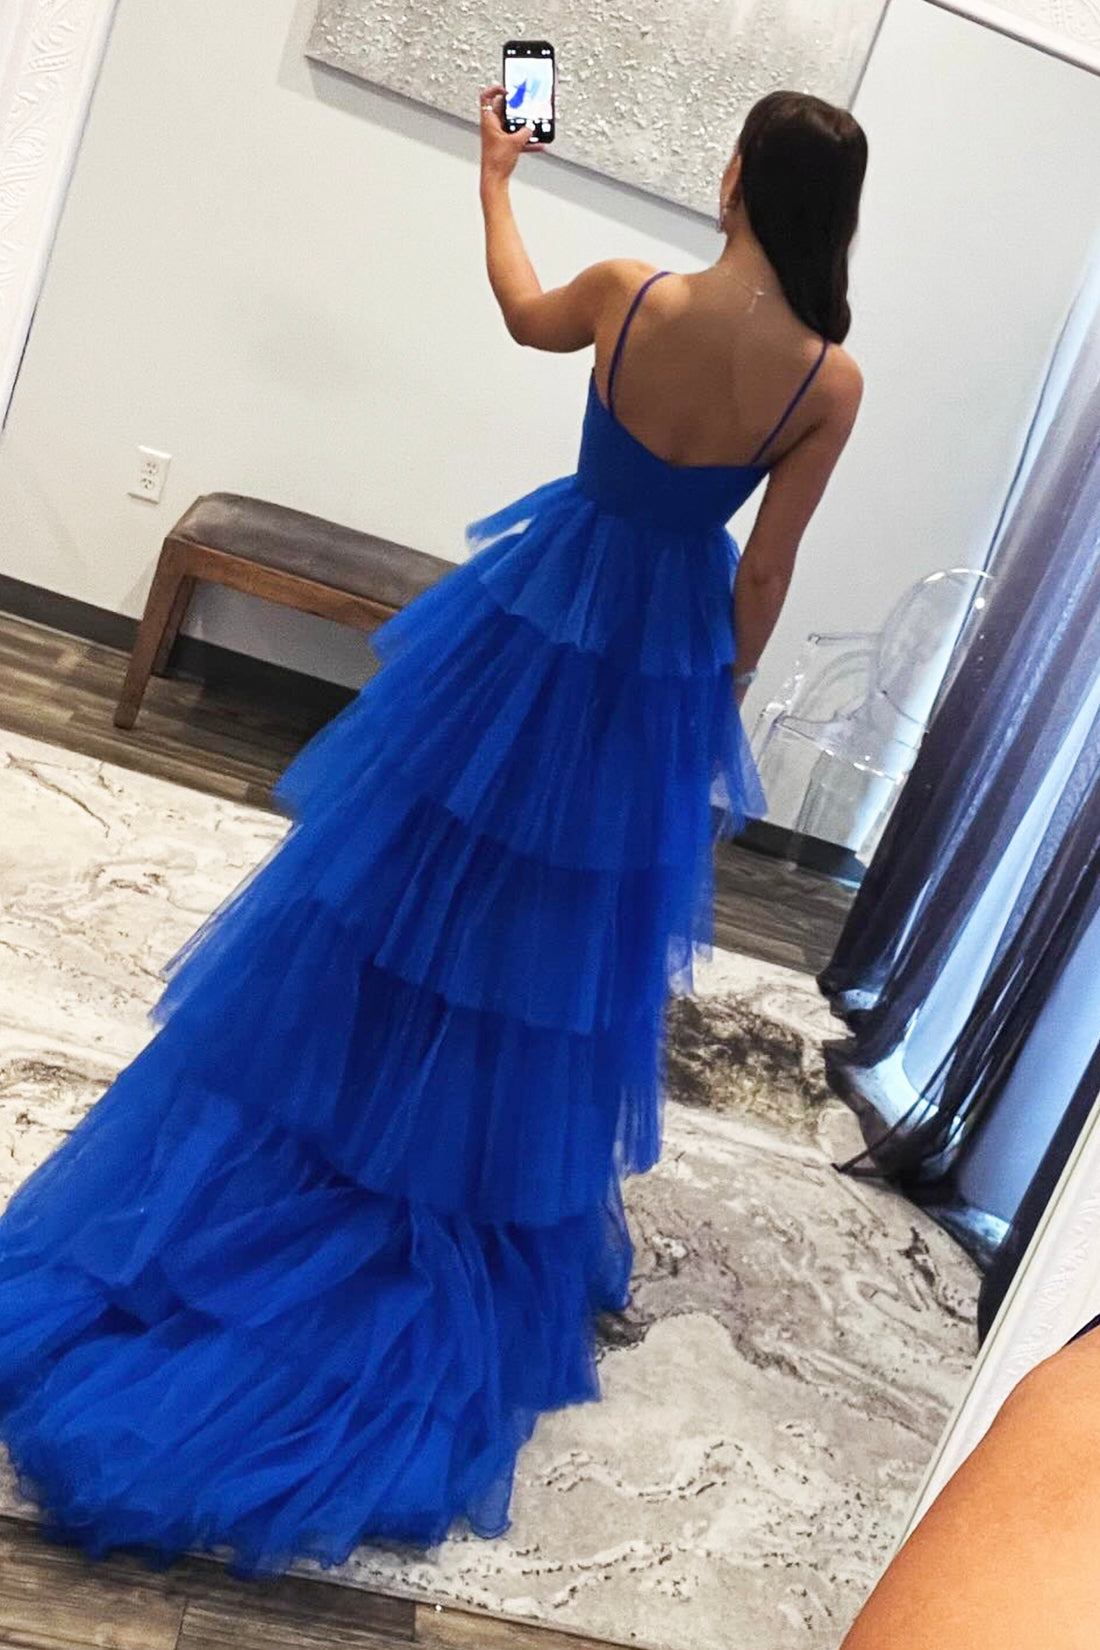 Blue Tulle Halter Tiered Party Dress, Beautiful A-Line Backless Formal Evening Dress